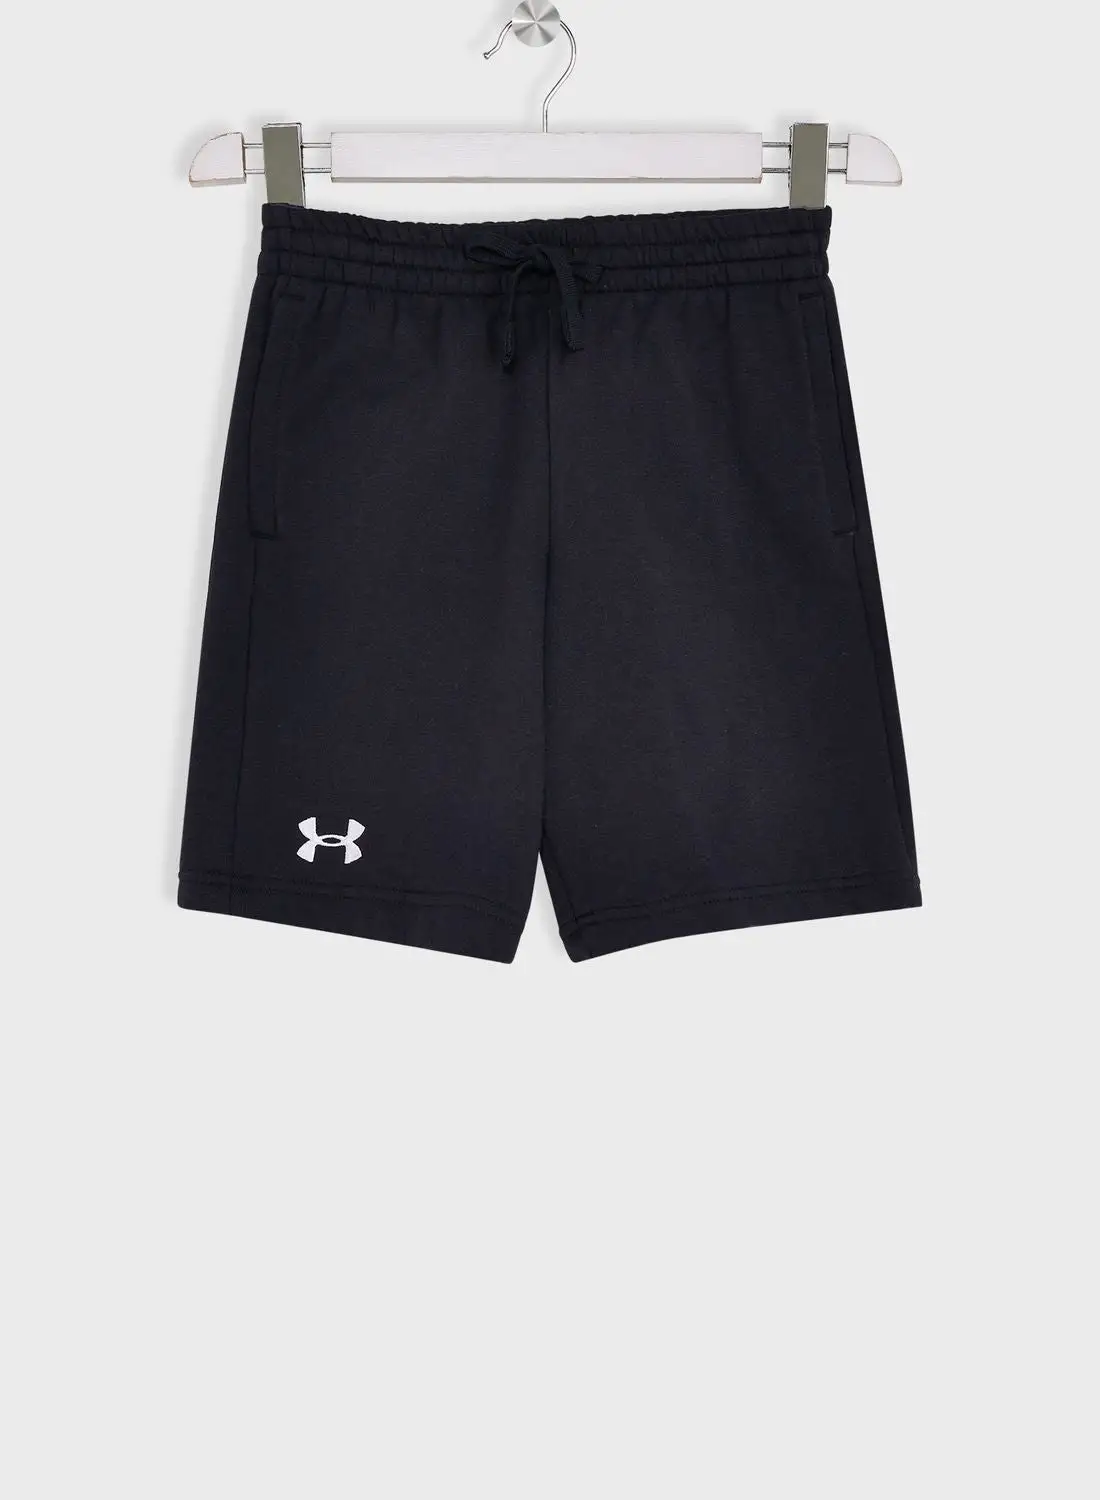 UNDER ARMOUR Youth  Rival Fleece Shorts